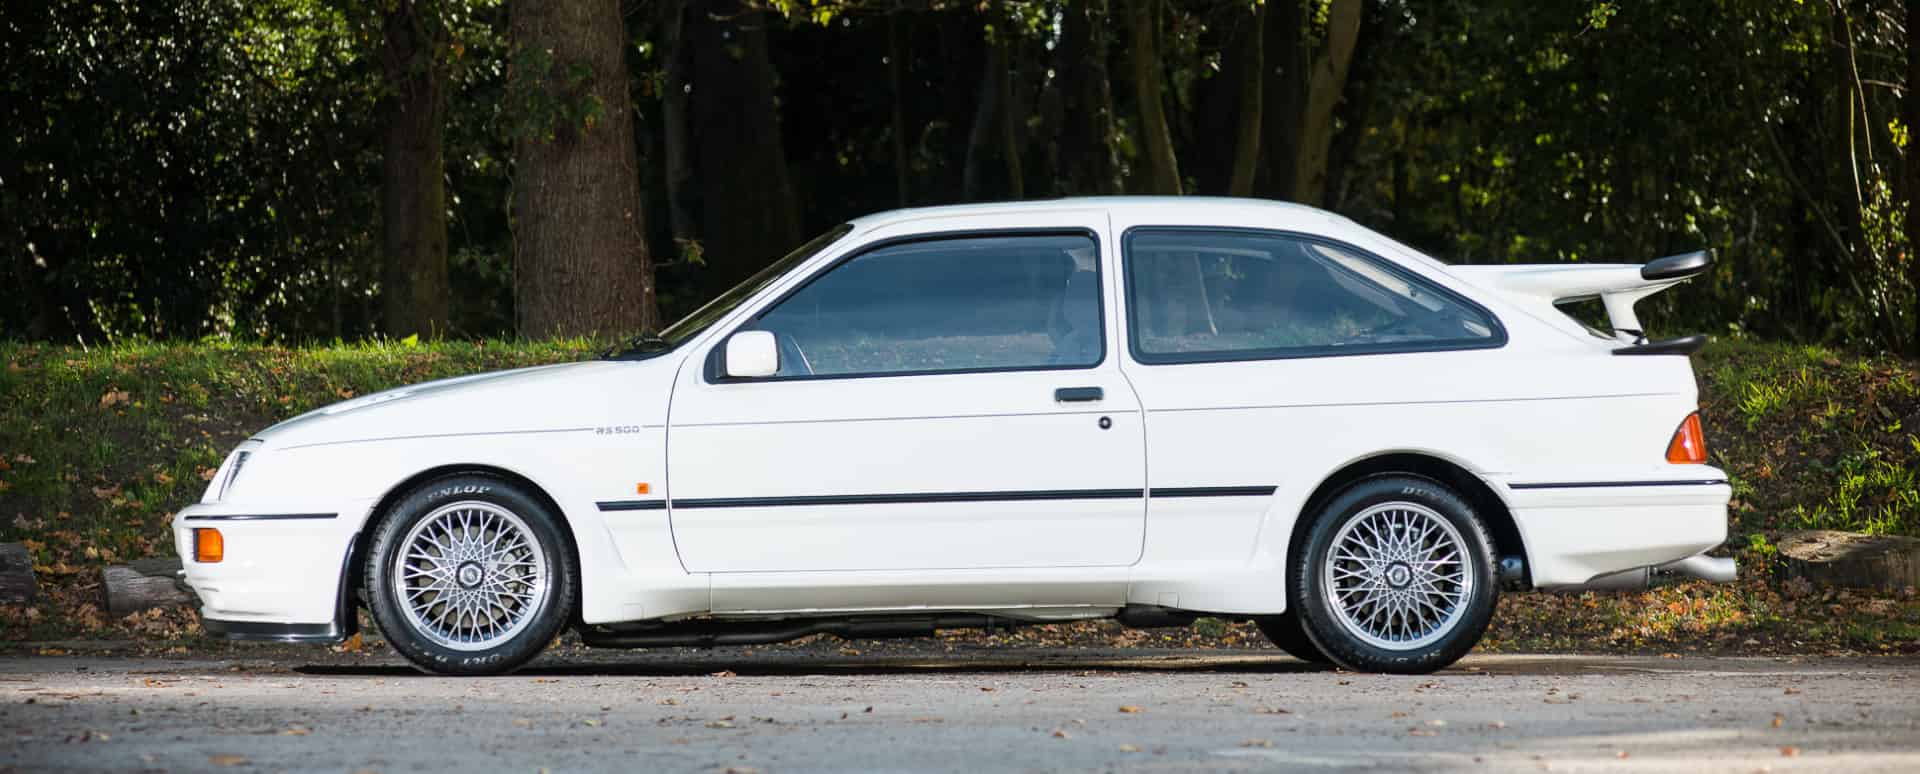 Ford Sierra Cosworth RS500 Hero